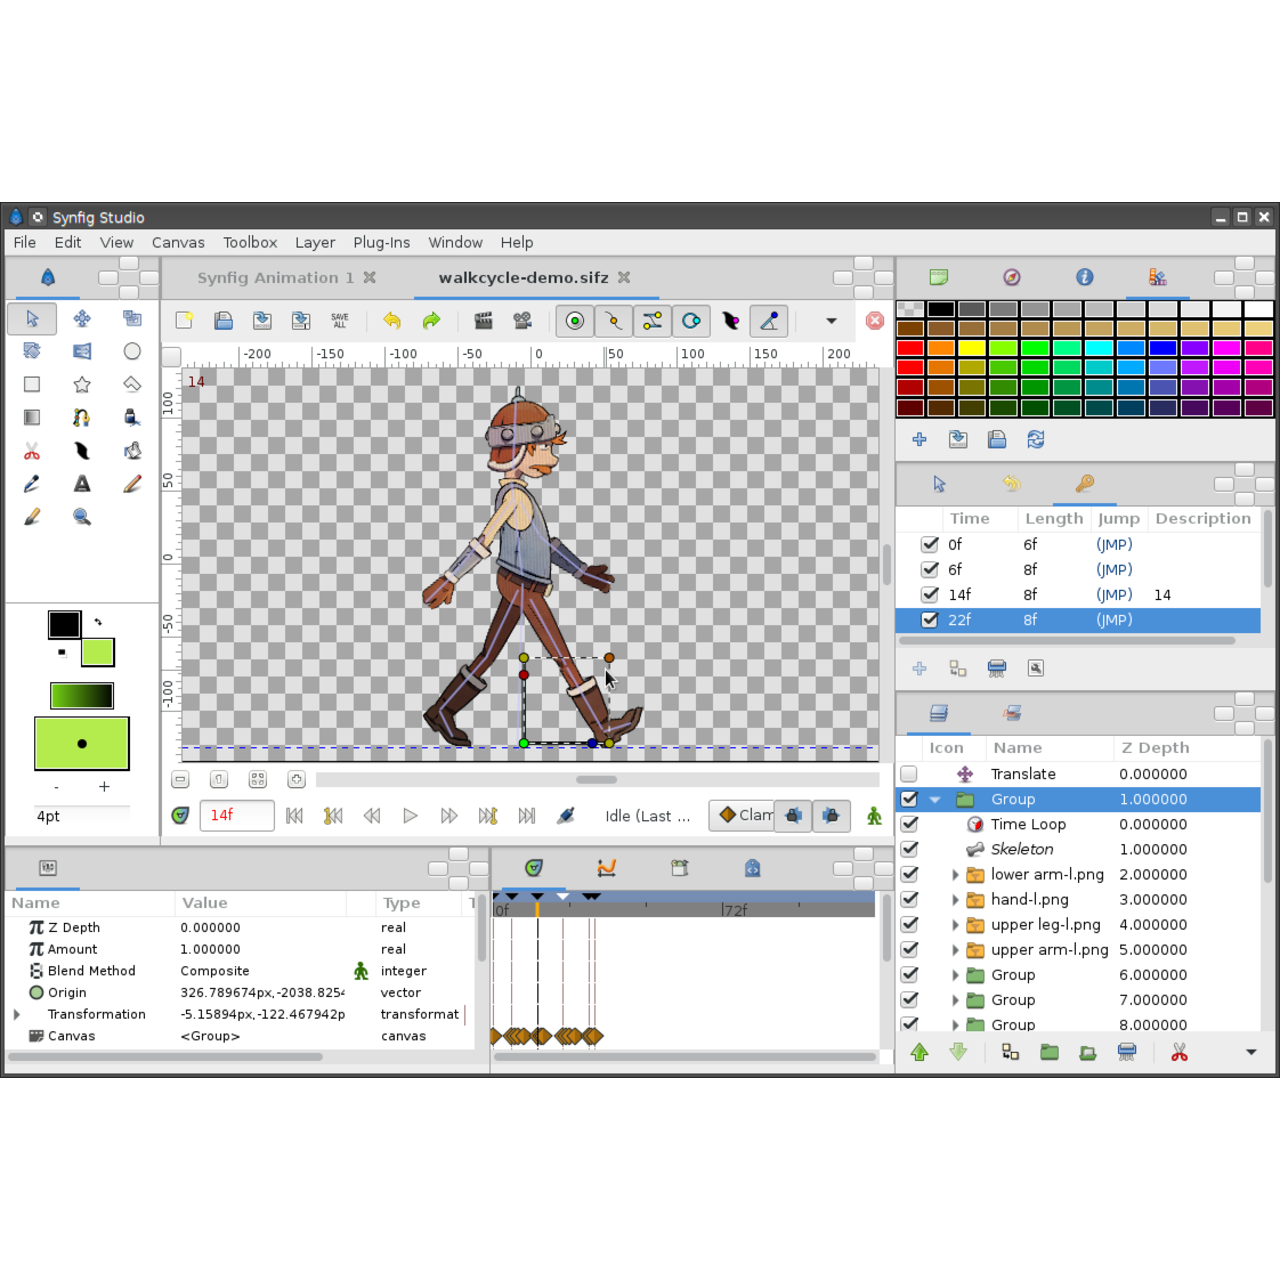 synfig studio compatible with mac os